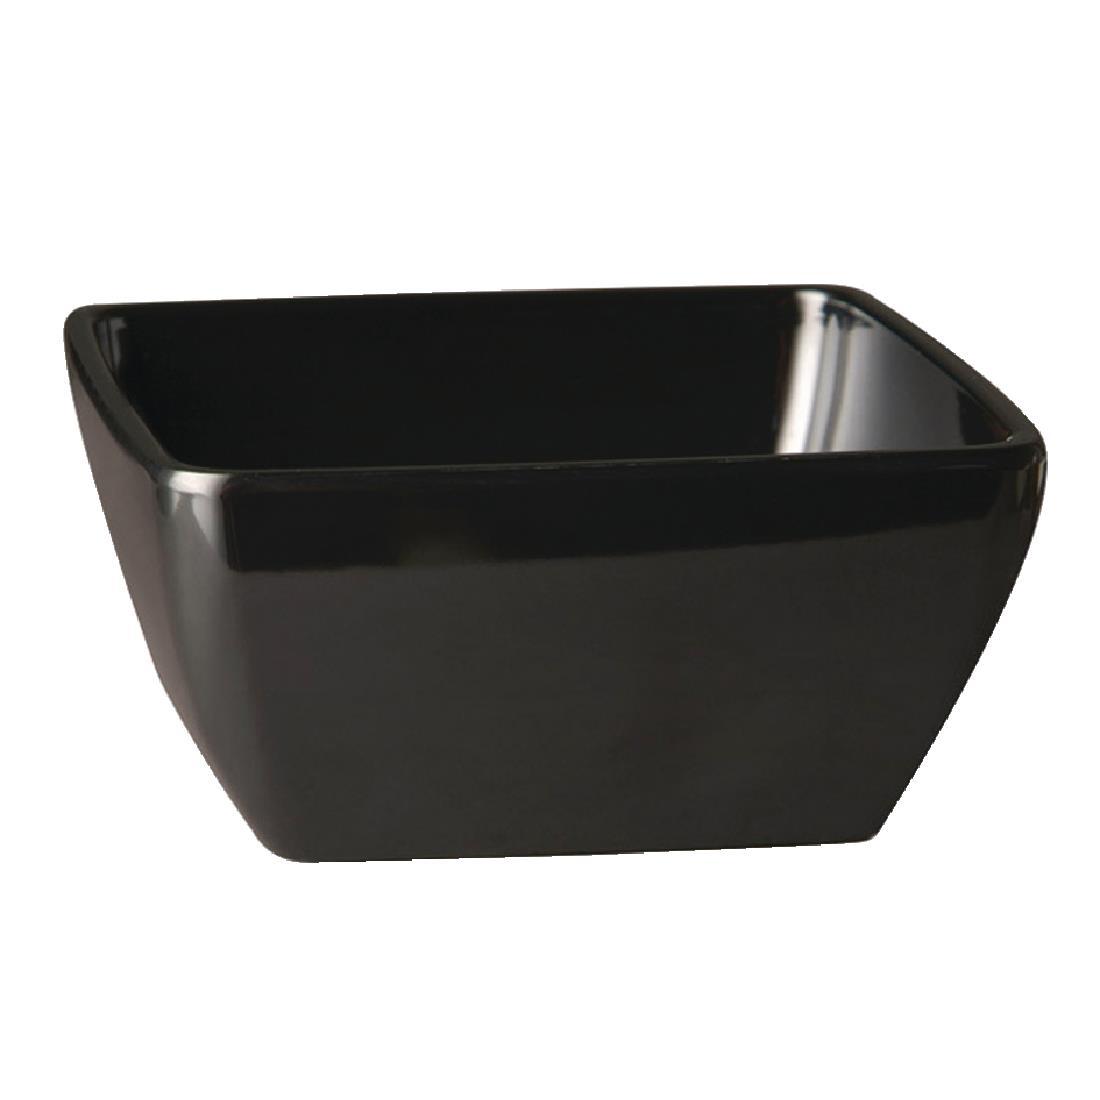 Special Offer APS Black Melamine Tray and Bowl Set with Signs and Holders - Each - S959 - 1